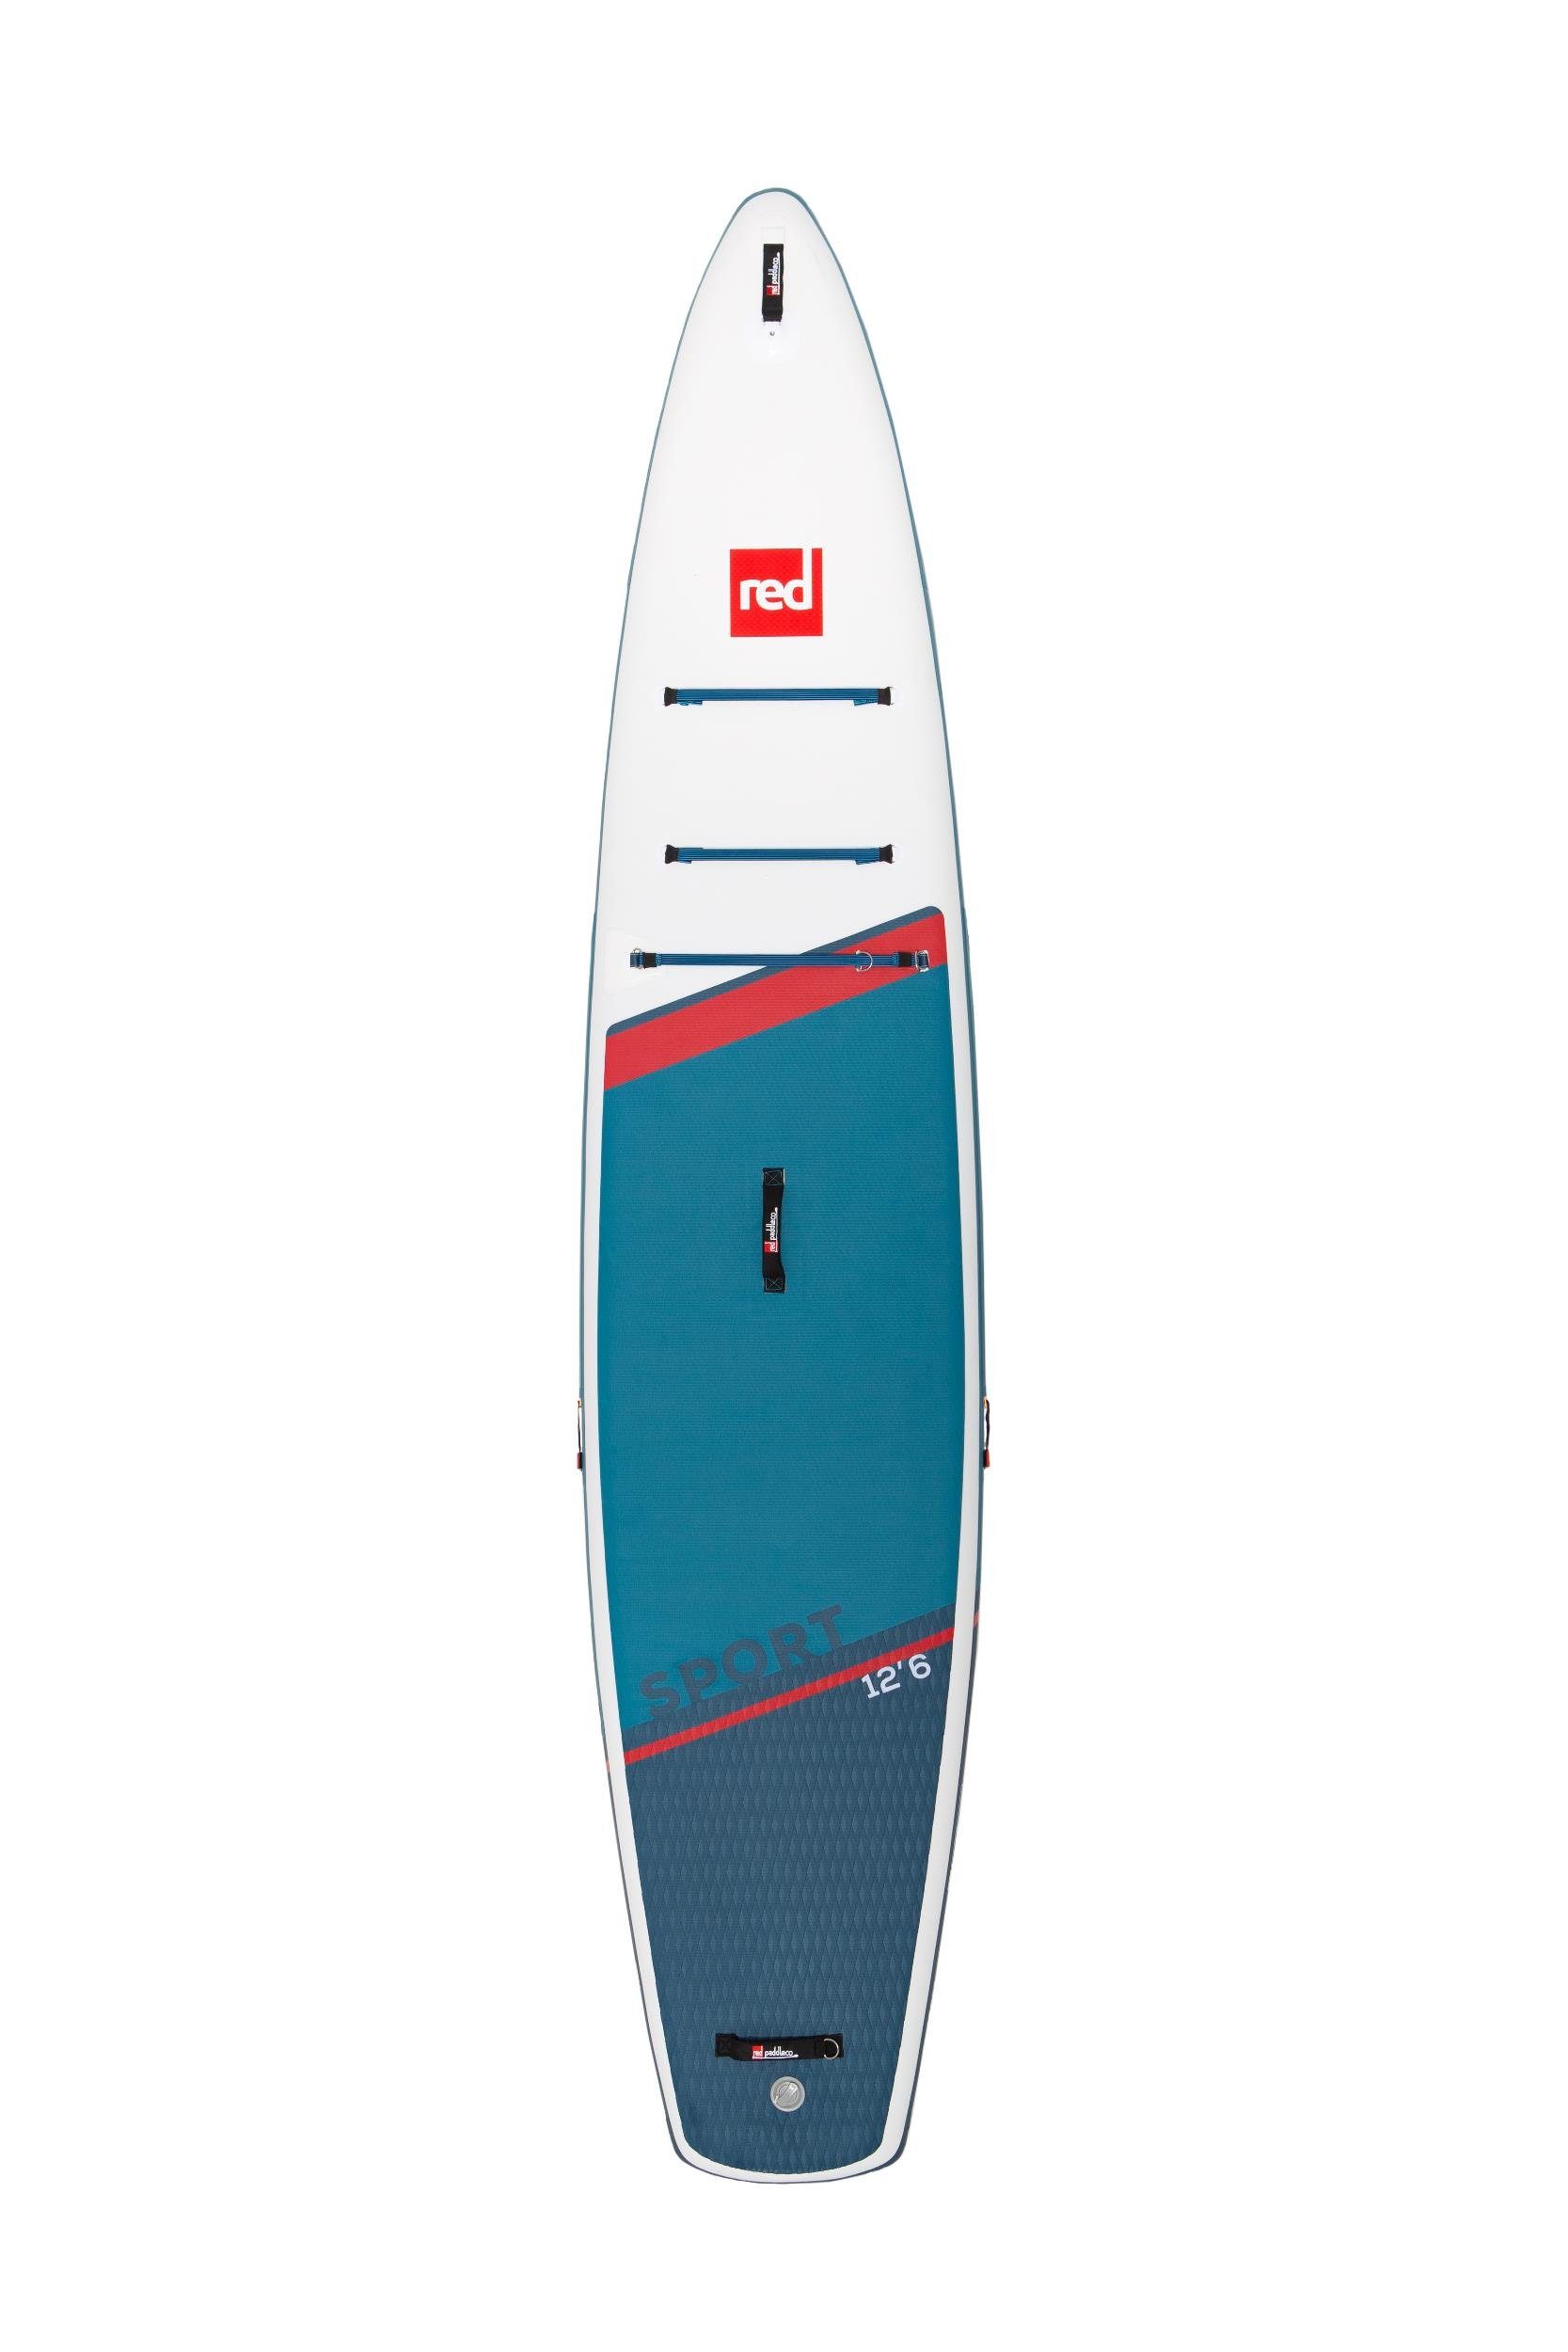 SPORT SUP-Board 6" MSL SUP 30" SET Paddle Co 12'6" x Red x Paddle Red